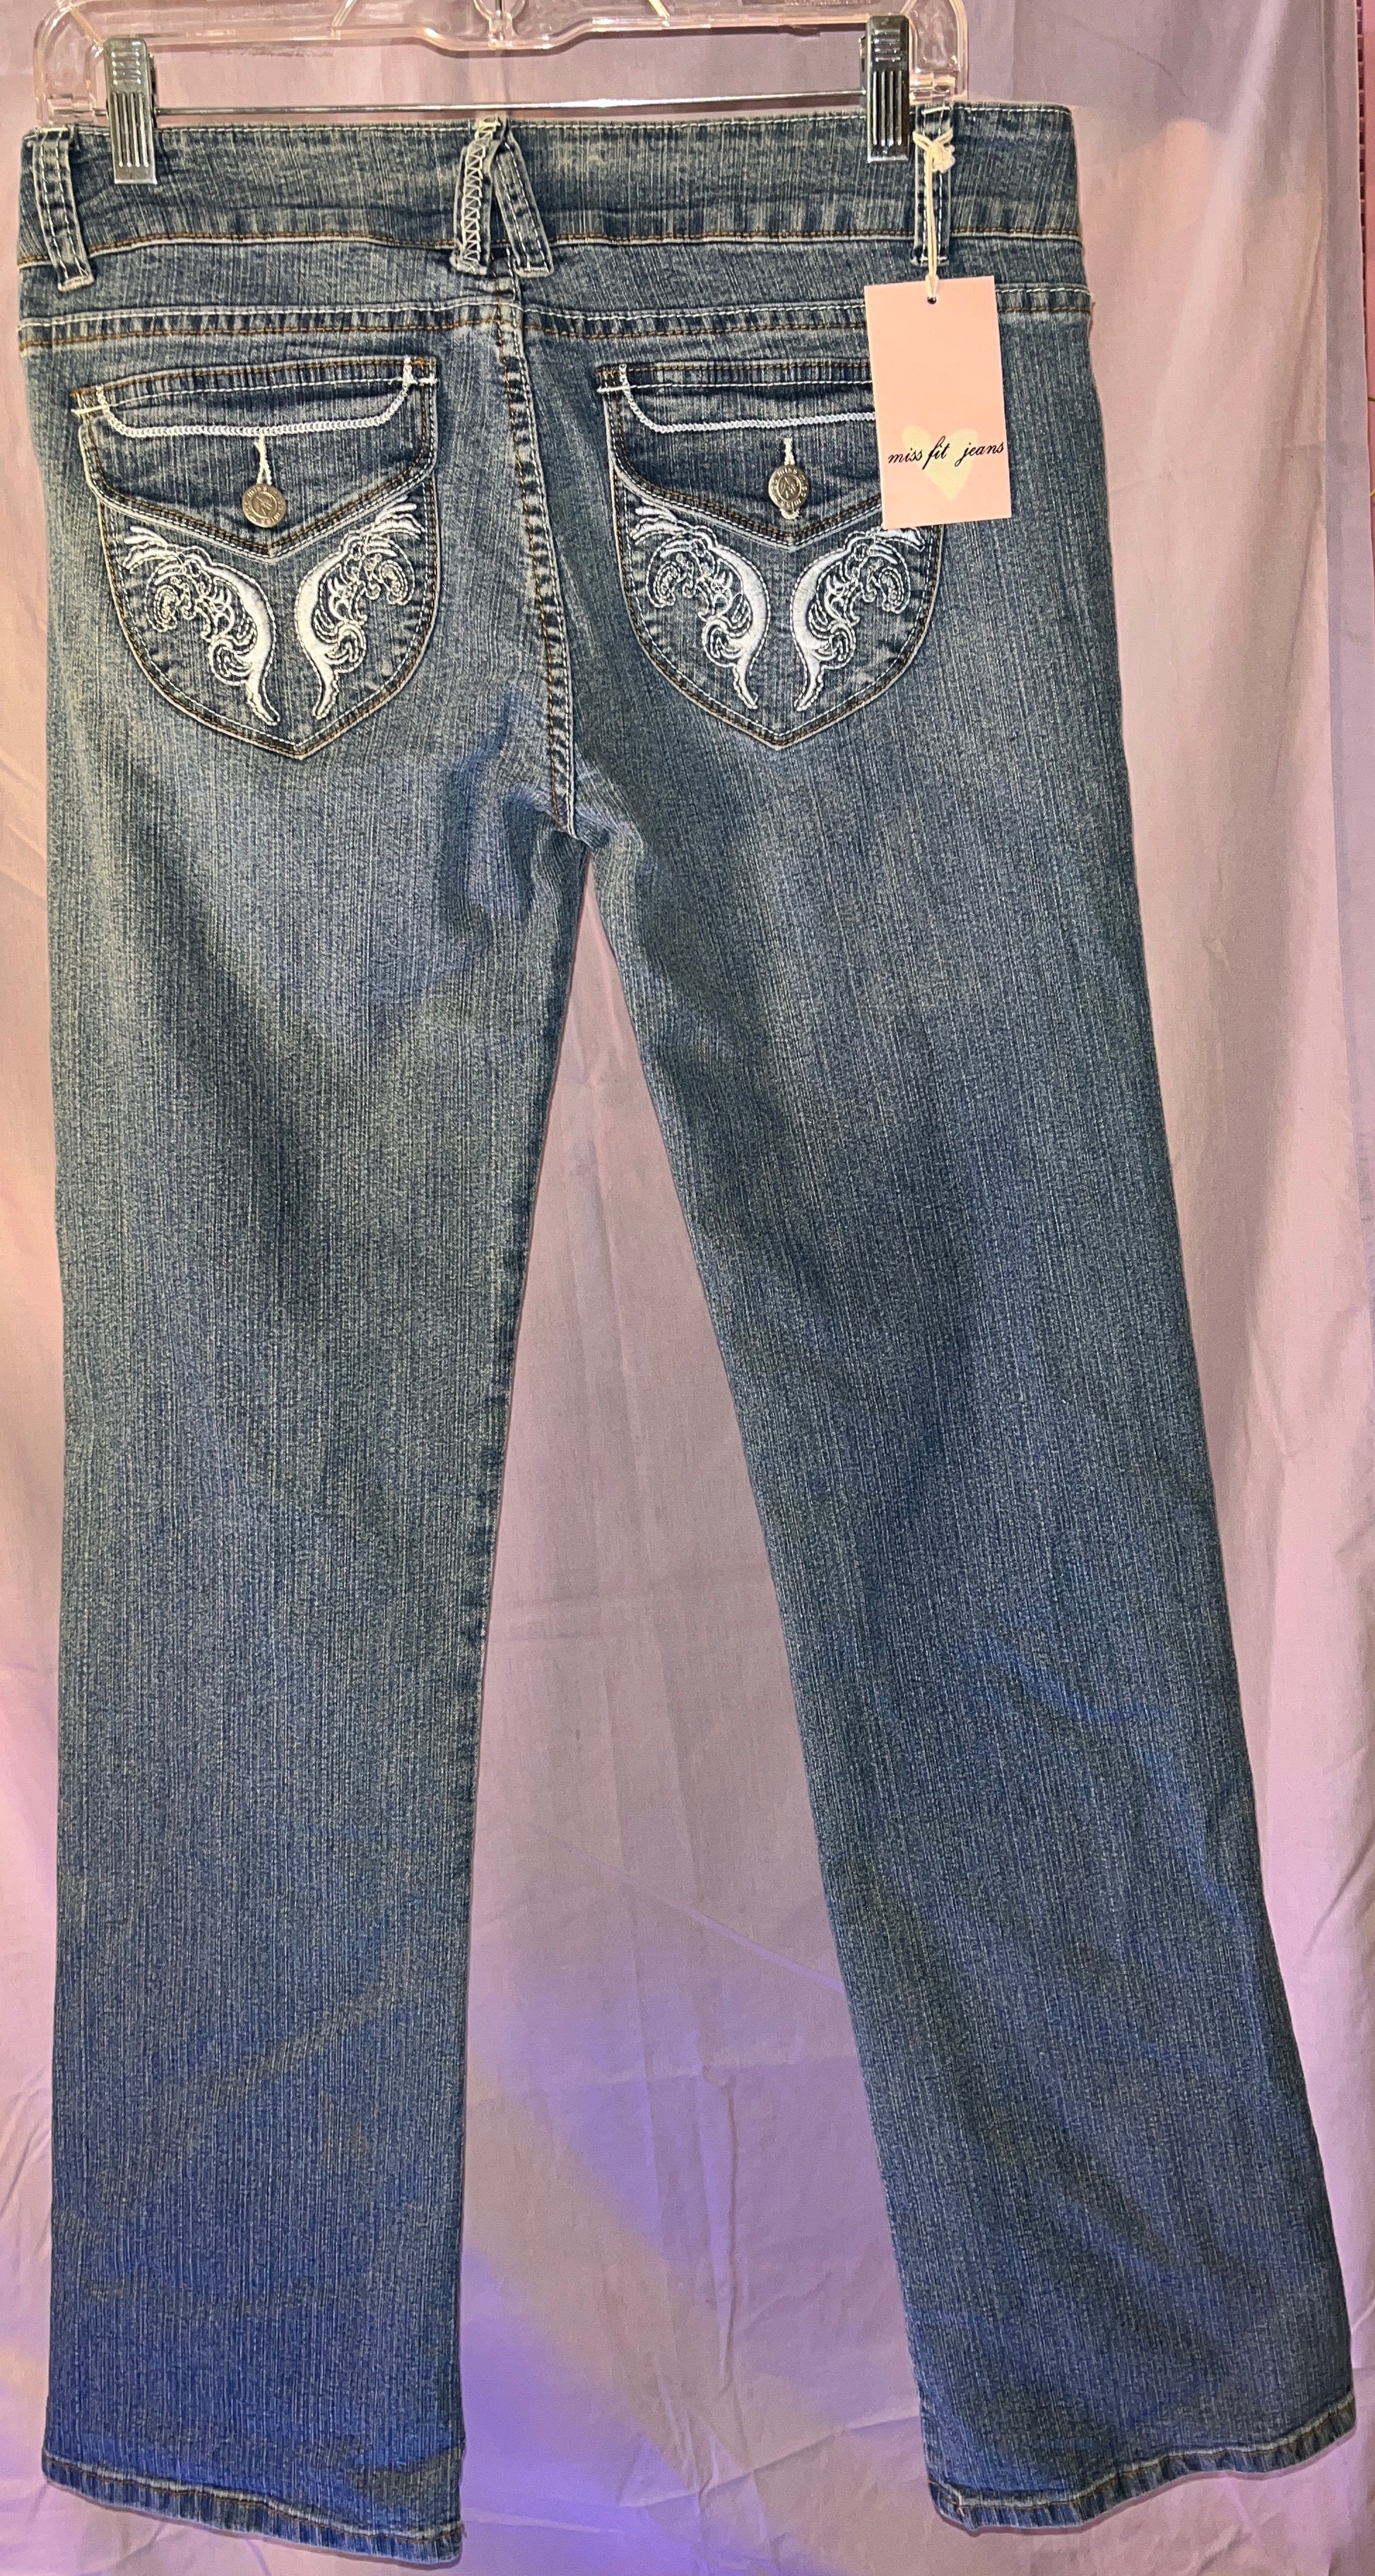 Miss Fit Jeans in Size 3, 9, 11, or 13